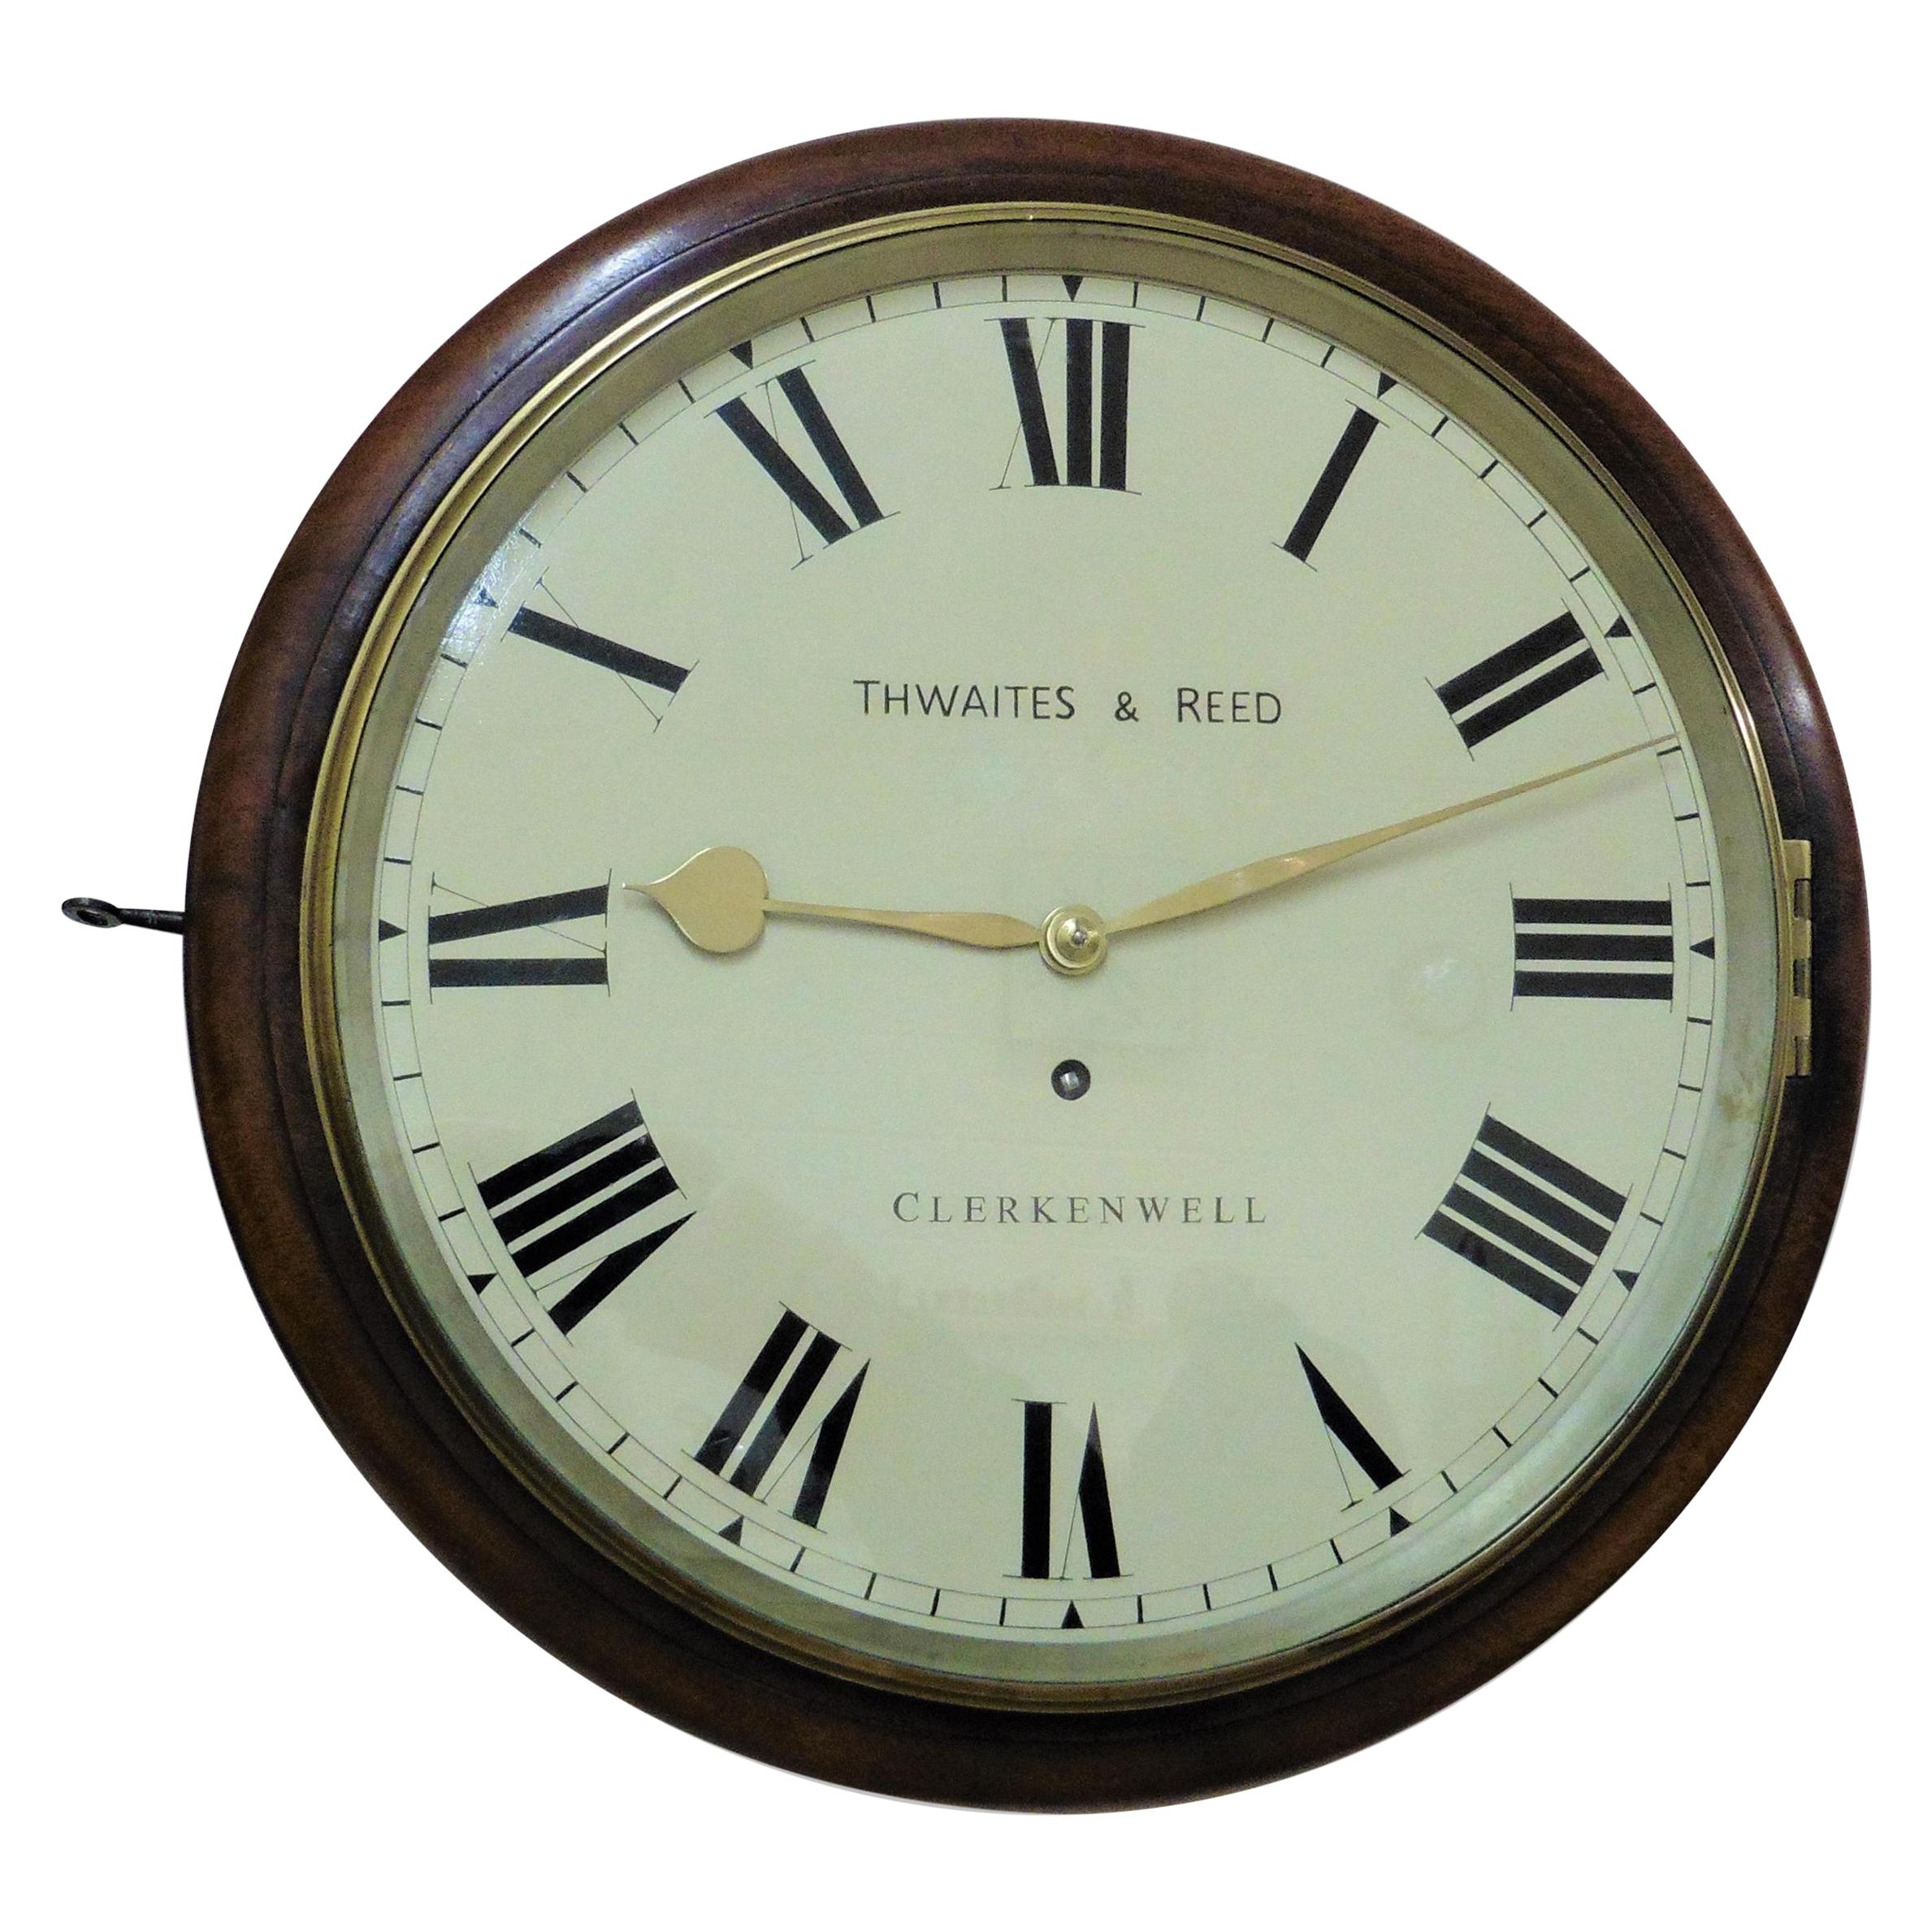 Regency Round Dial Wall Clock by Thwaites and Reed, London